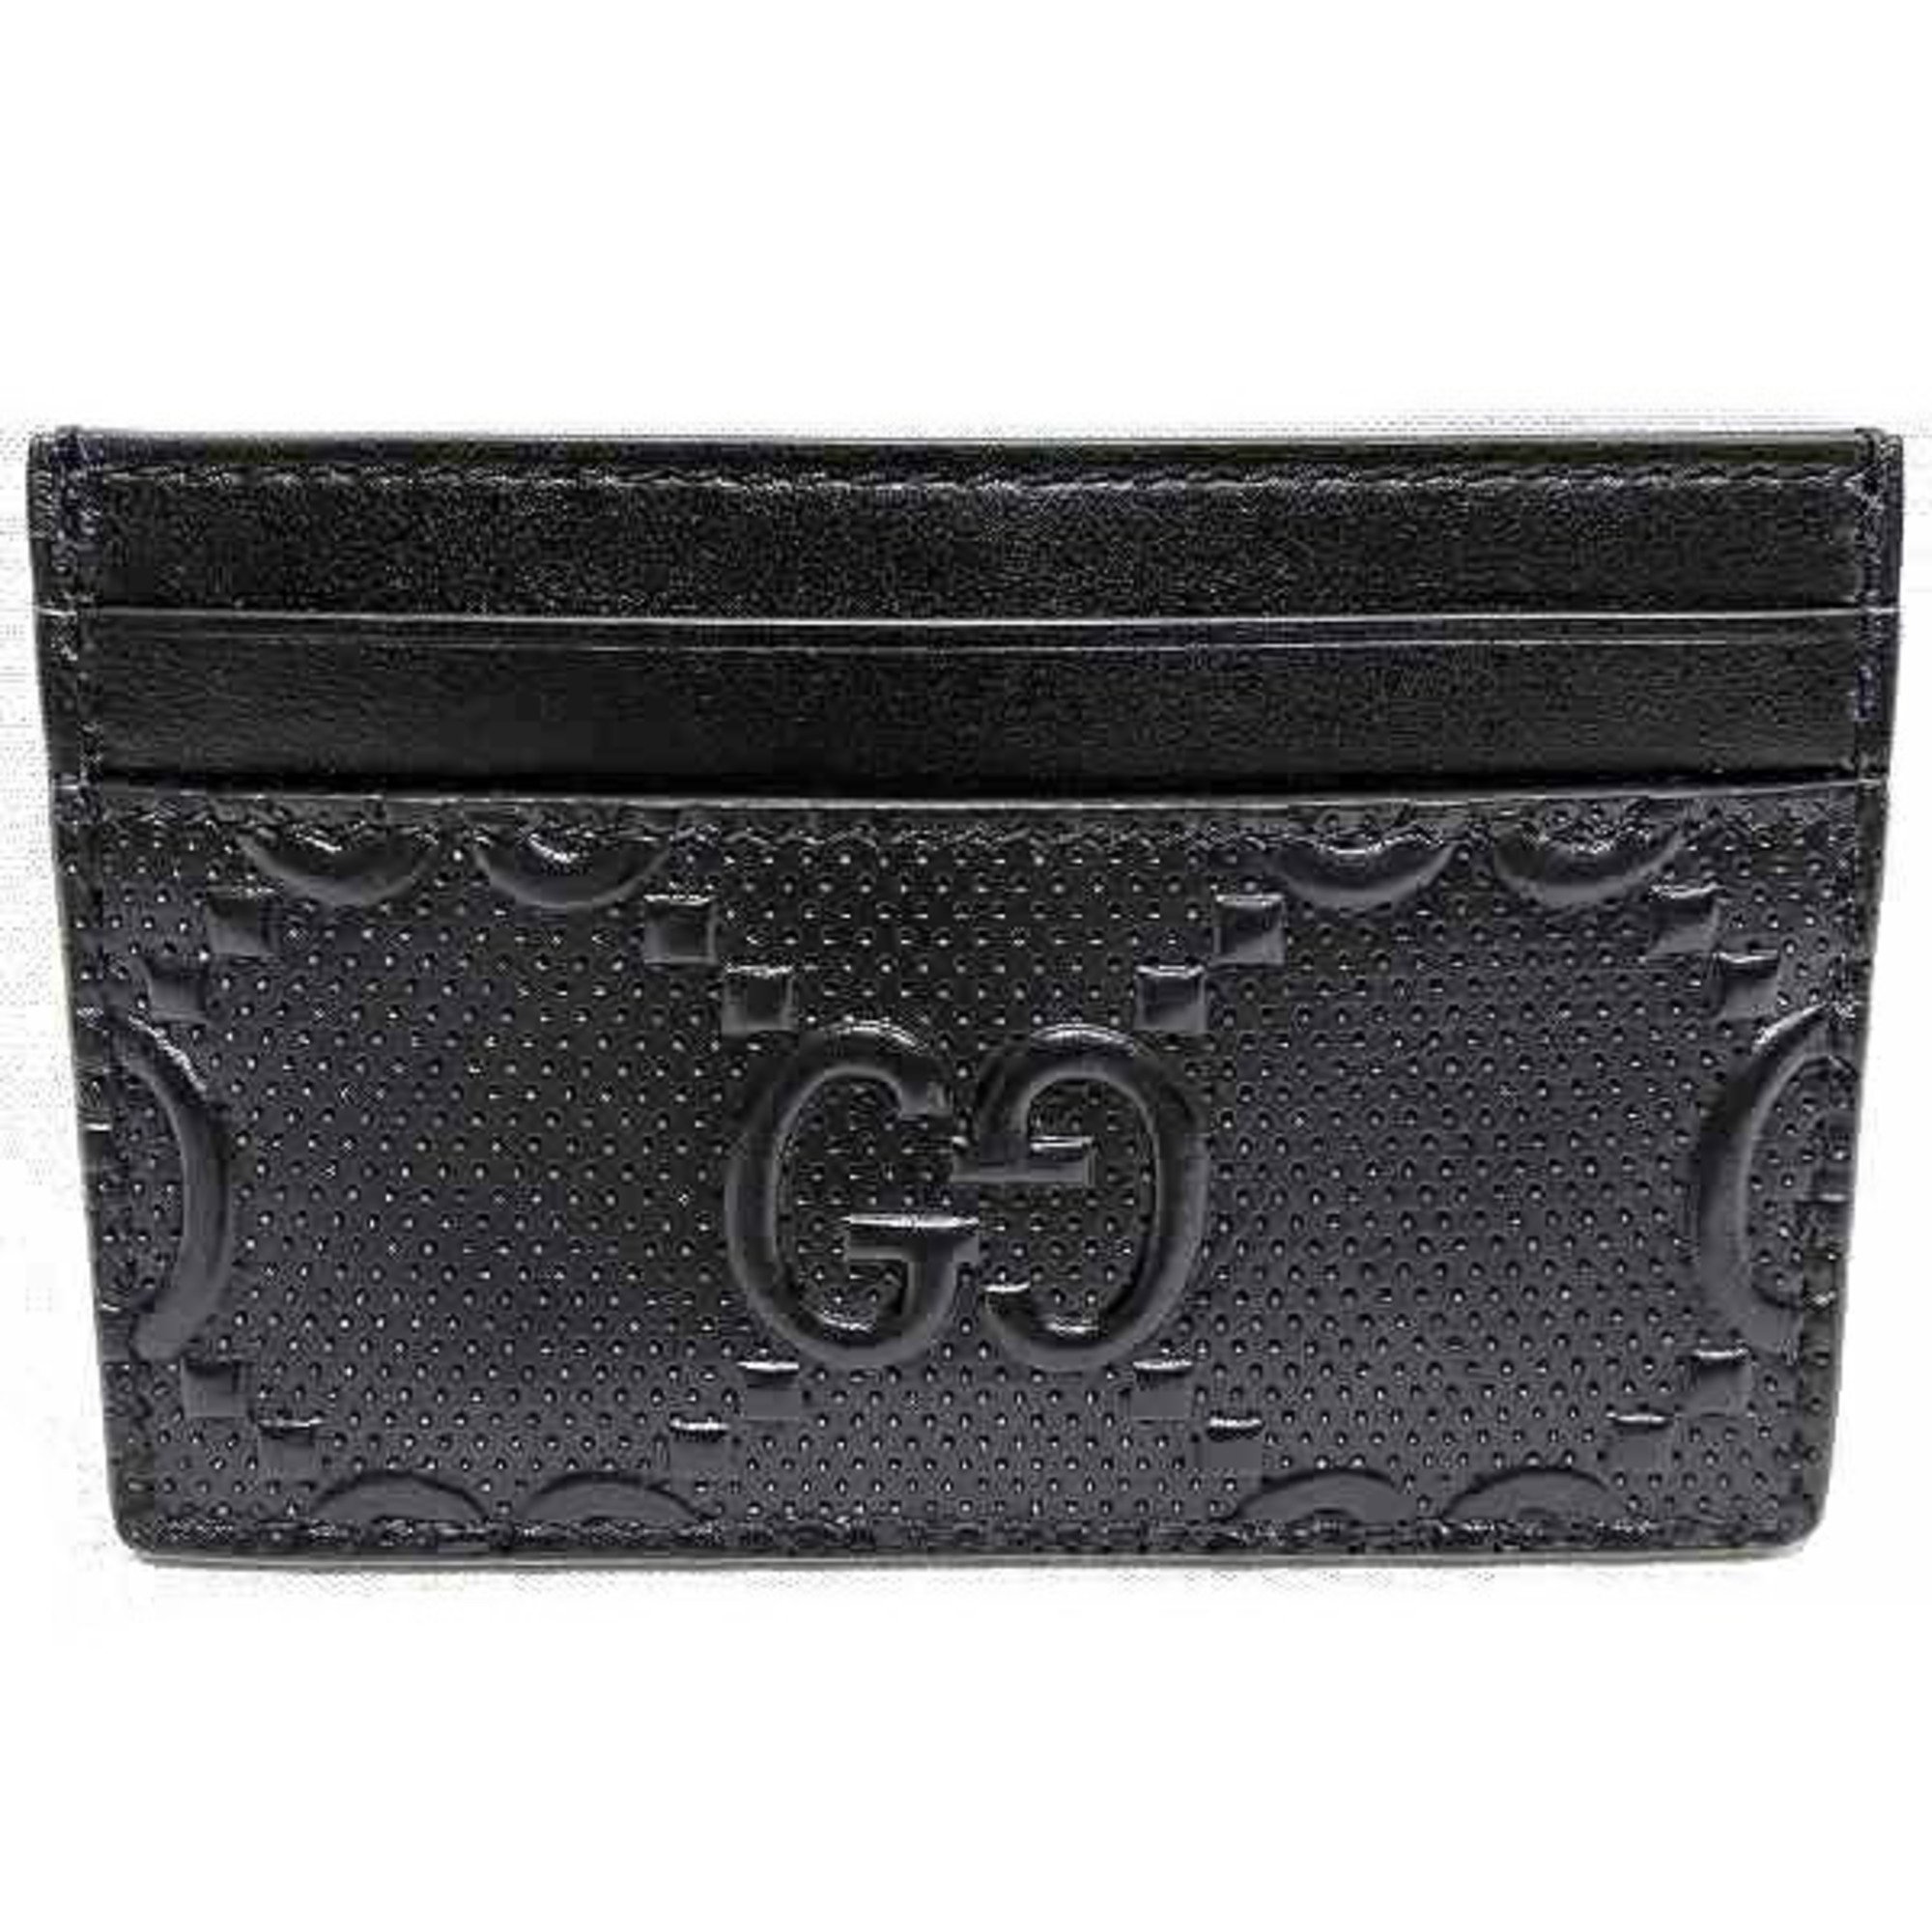 GUCCI 625564 GG Embossed Leather Brand Accessories Pass Case Business Card Holder Men's